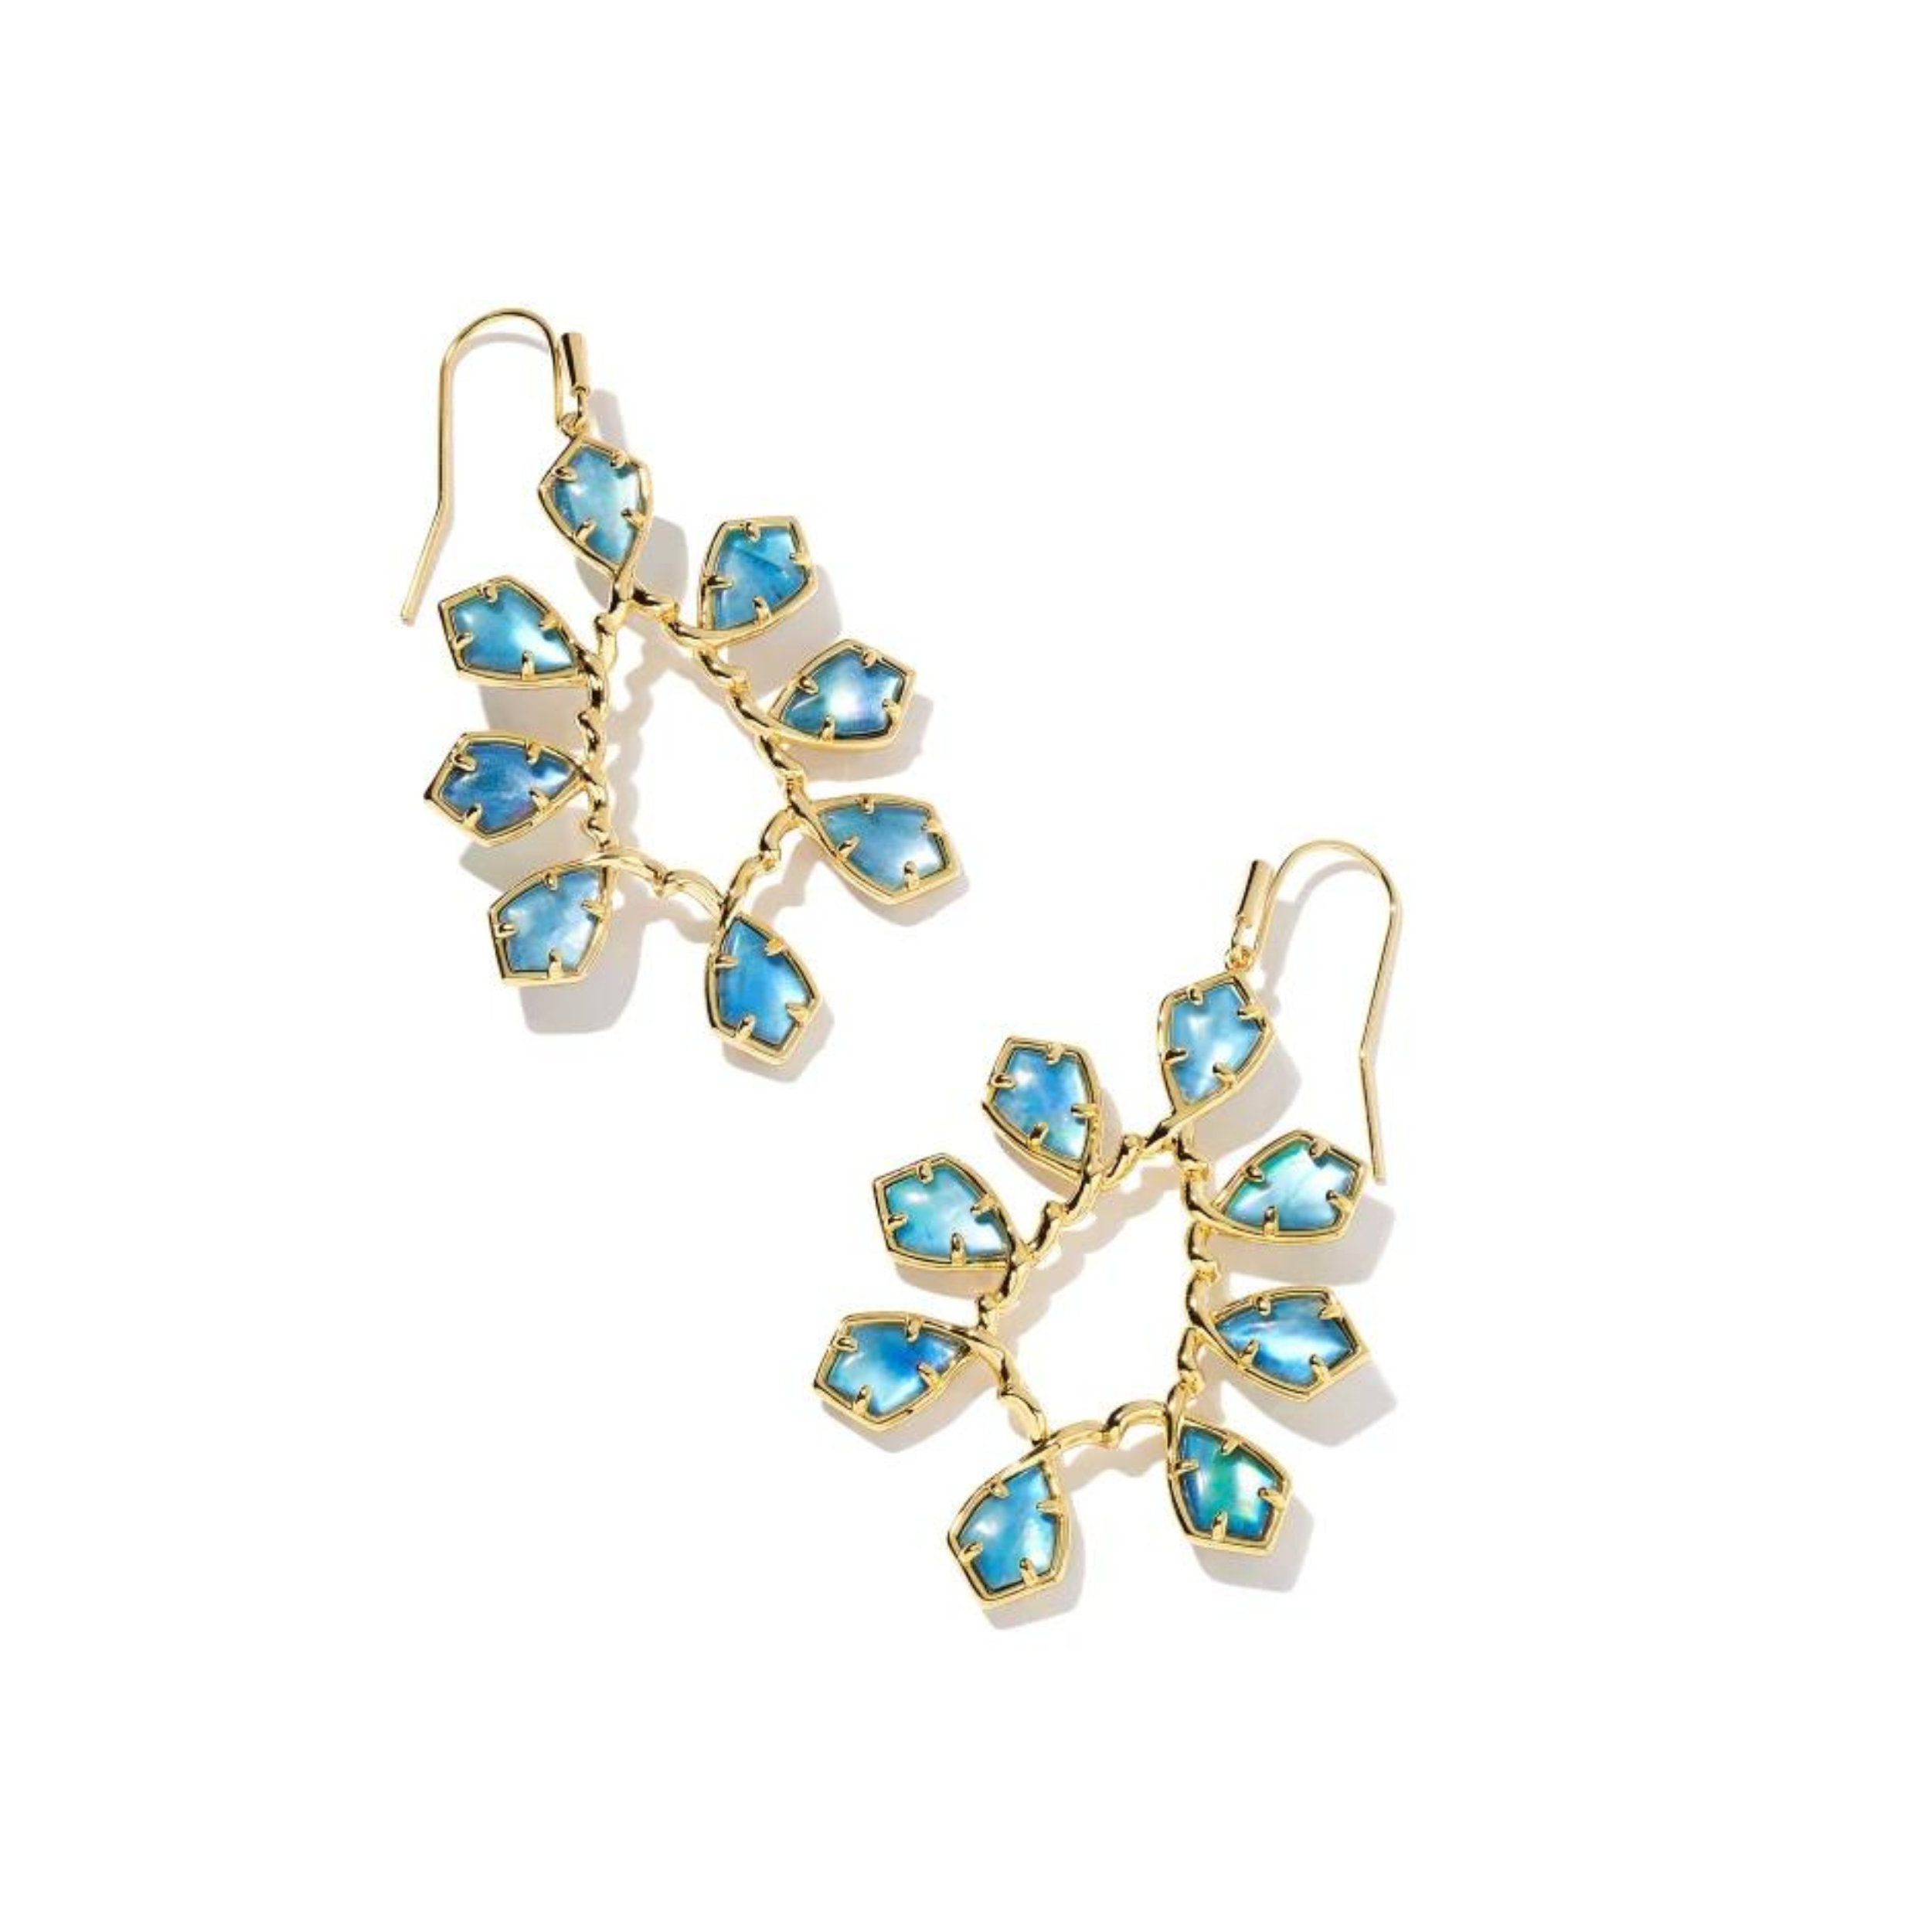 Gold open framed dangle earrings with dark blue mother of pearl stones, pictured on a white background.